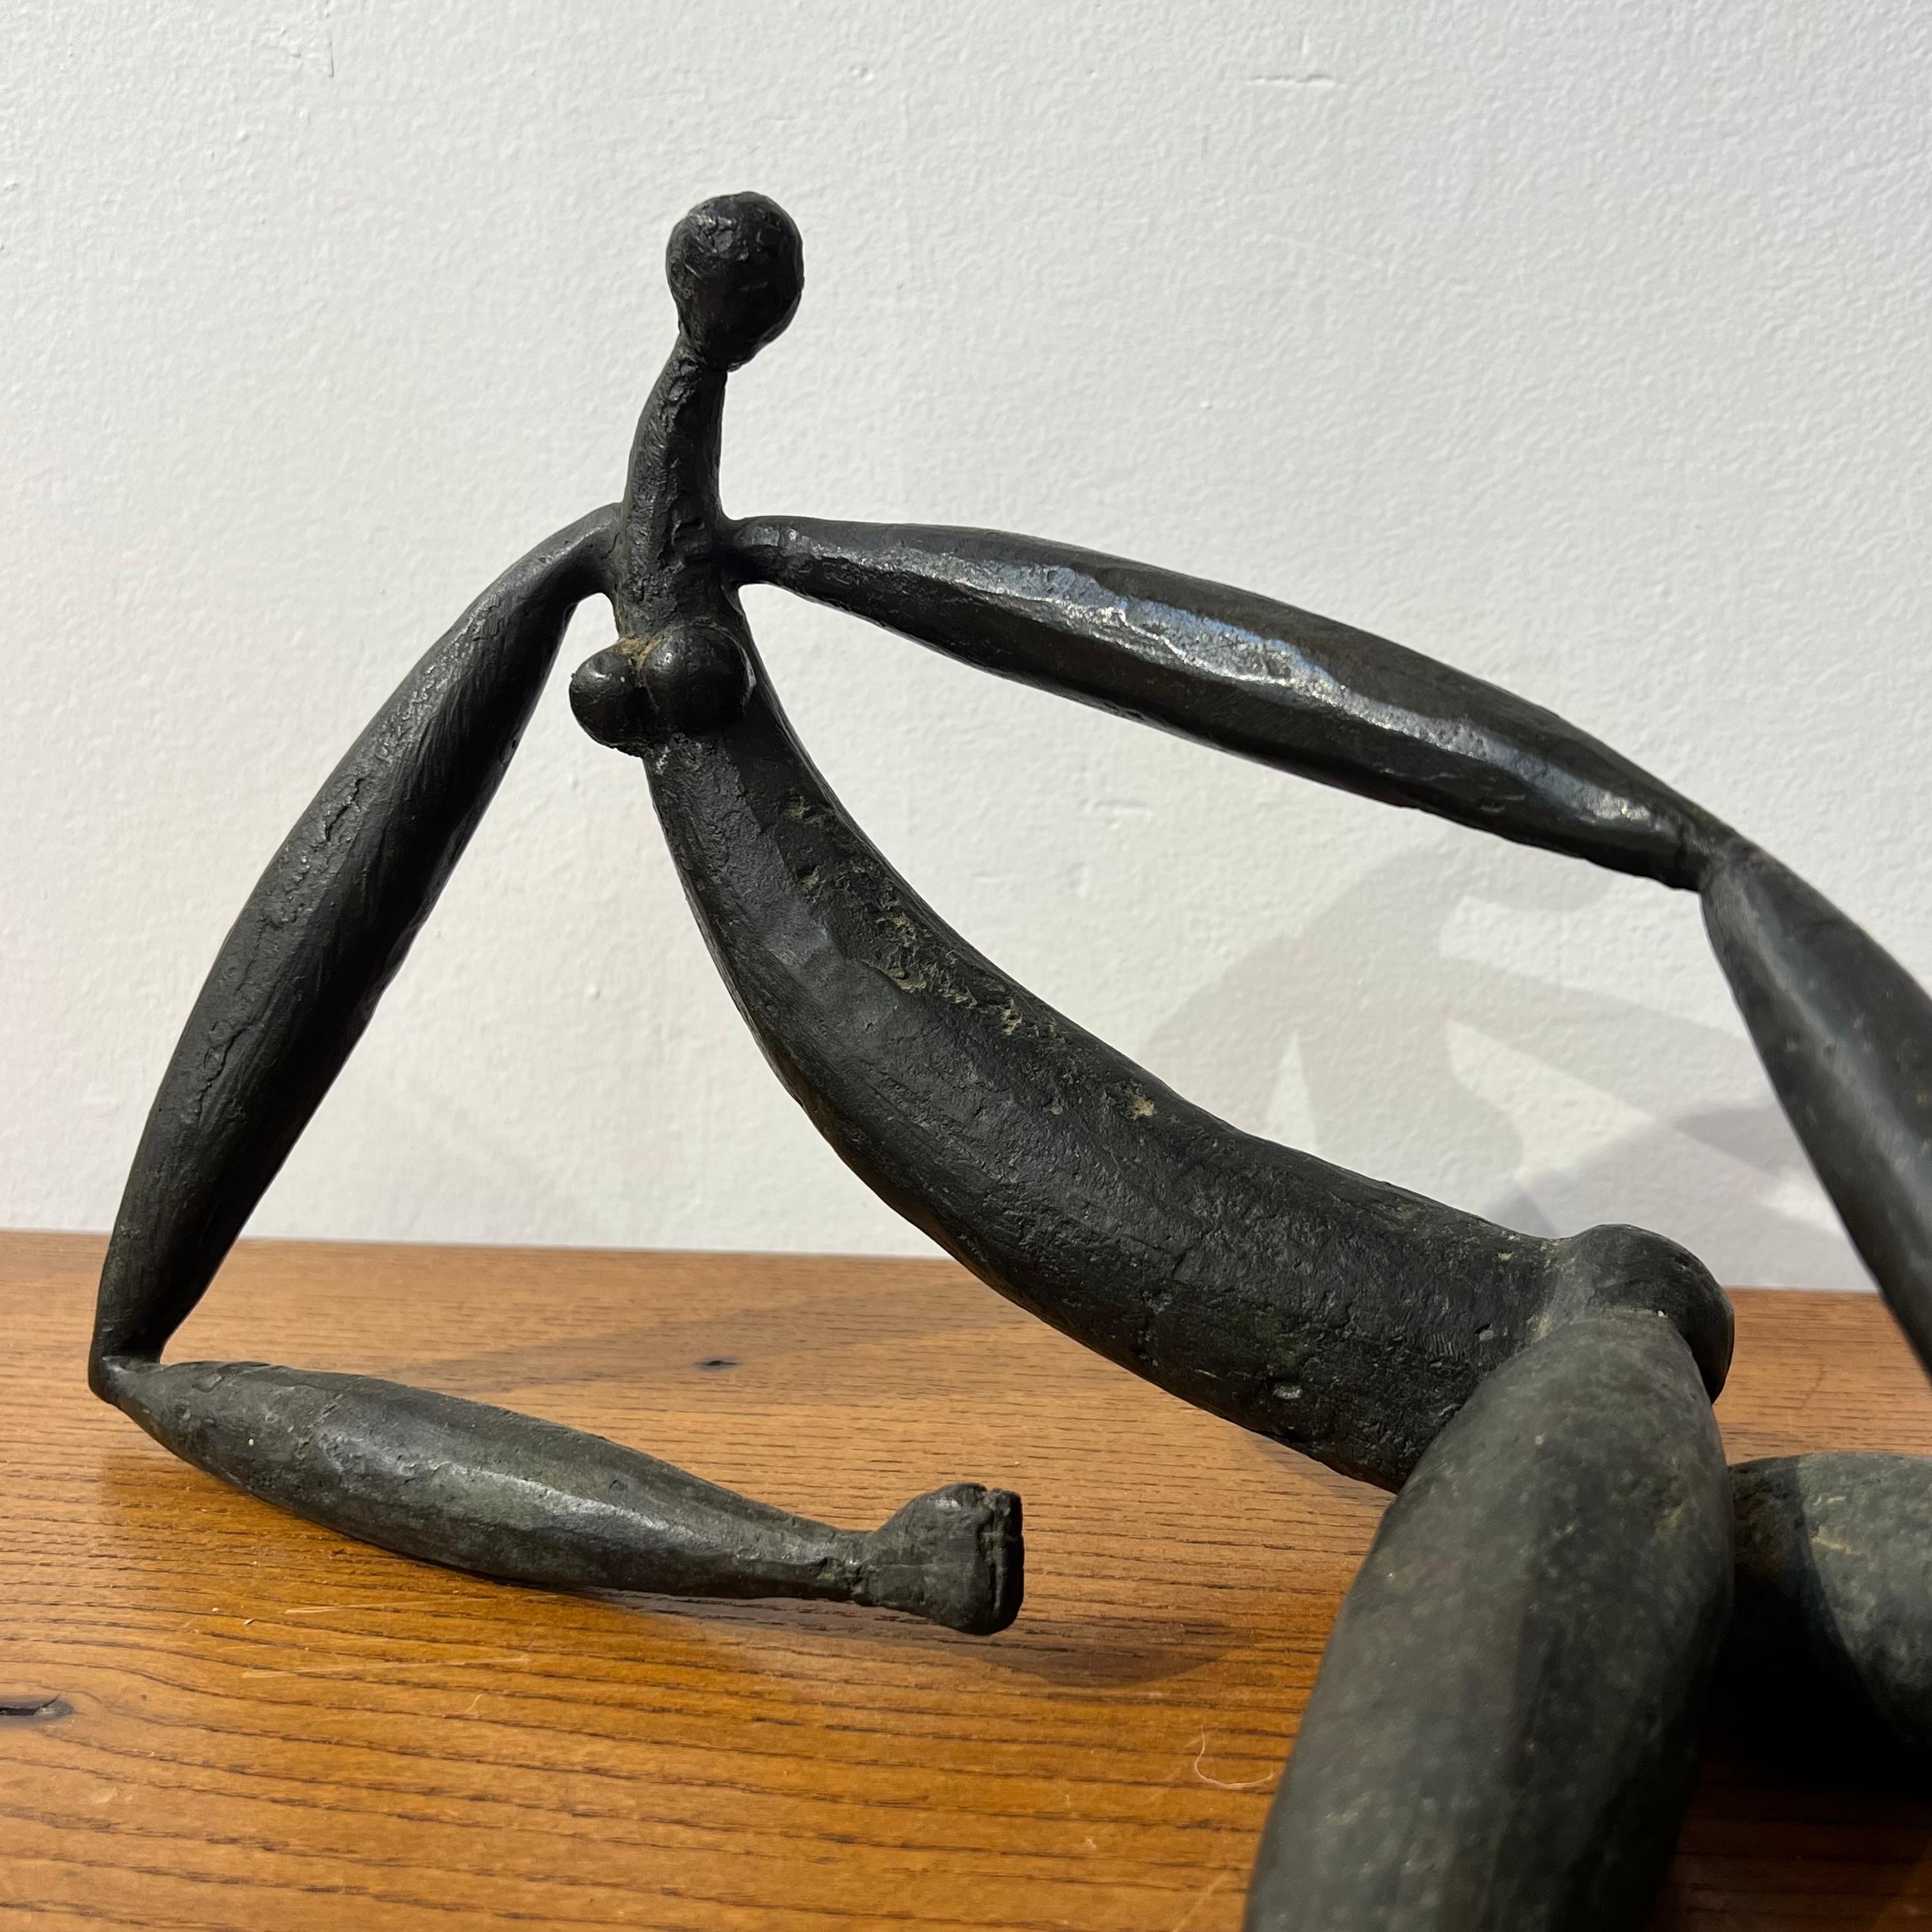 Bronze sculpture by Louis cane around 1980s

Cane was a part of the Supports/Surfaces Movement in France that lasted from 1969 to 1972 and co-founded and edited the Peinture, Cahiers Theoriques

In 1978, began sculpting again. They consisted of